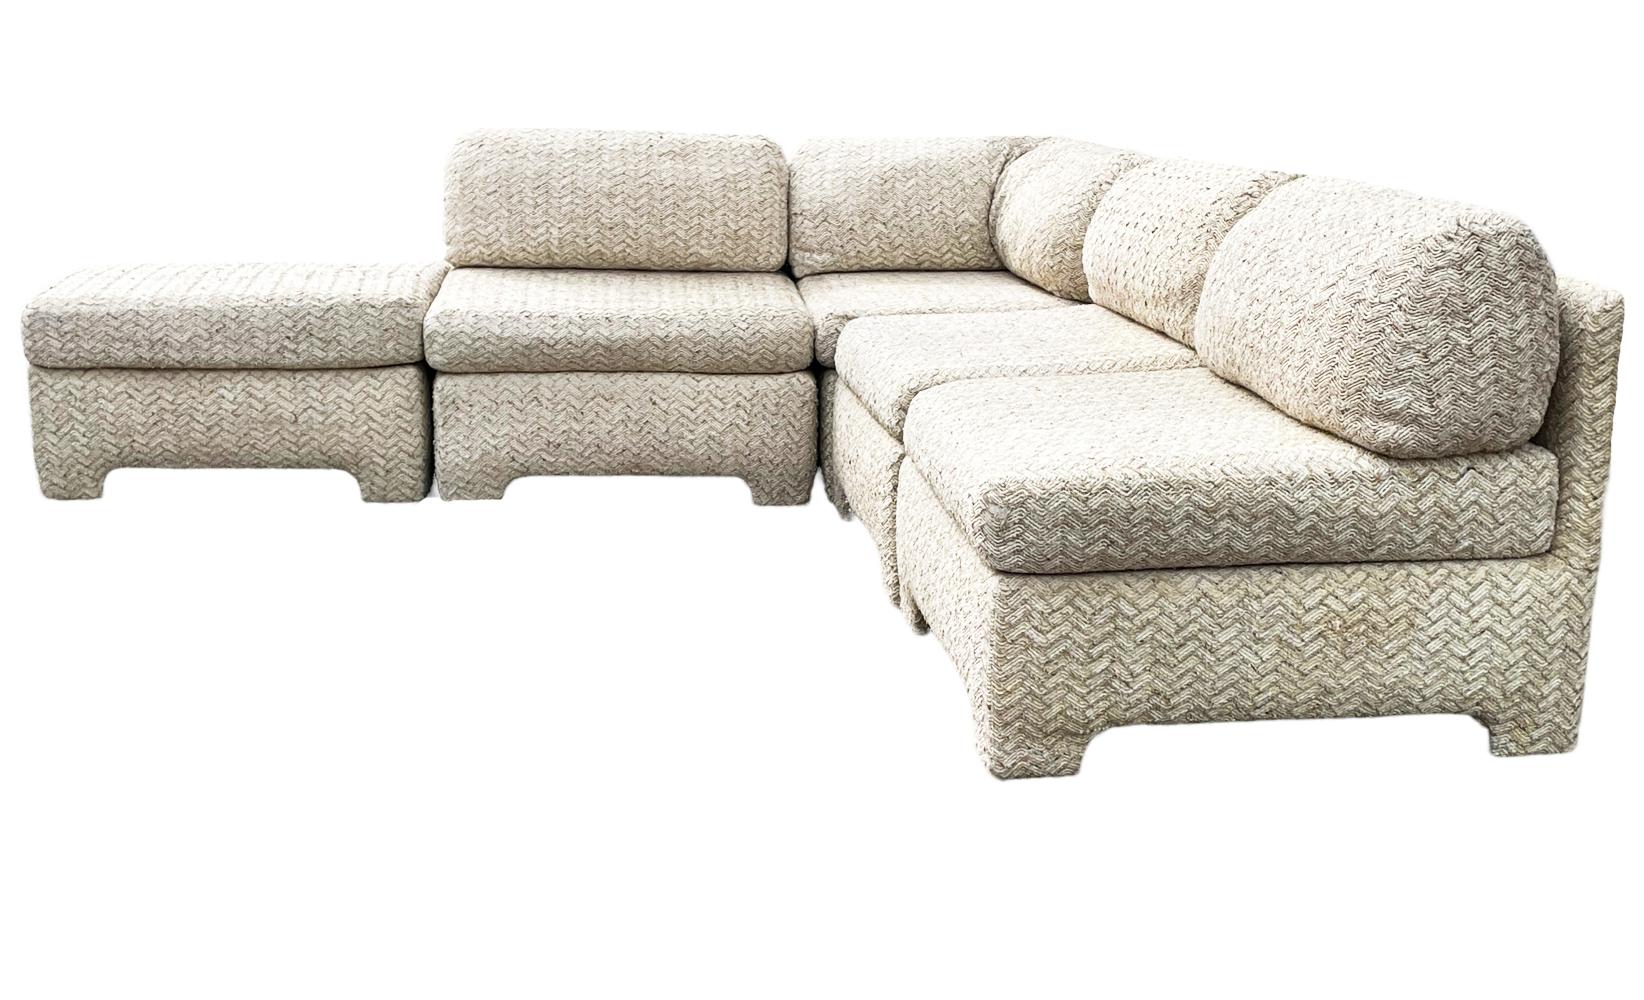 Mid Century Modern Boxy Modular Parsons Style L Shaped Sofa with Chaise Lounge For Sale 1